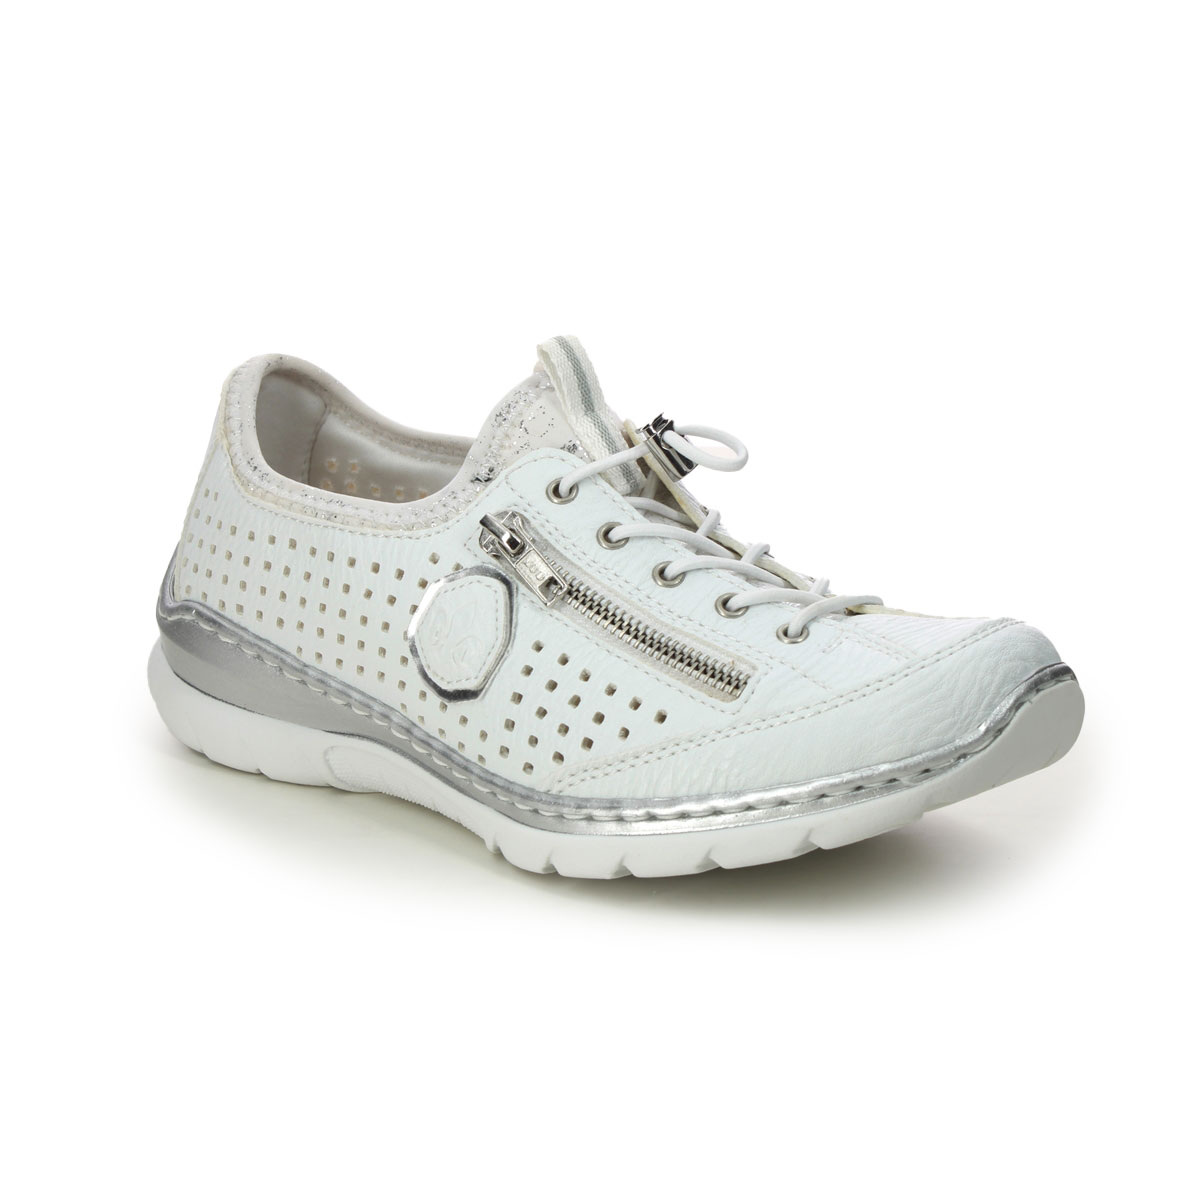 Rieker L3296-82 White Silver Womens lacing shoes in a Plain Man-made in Size 36